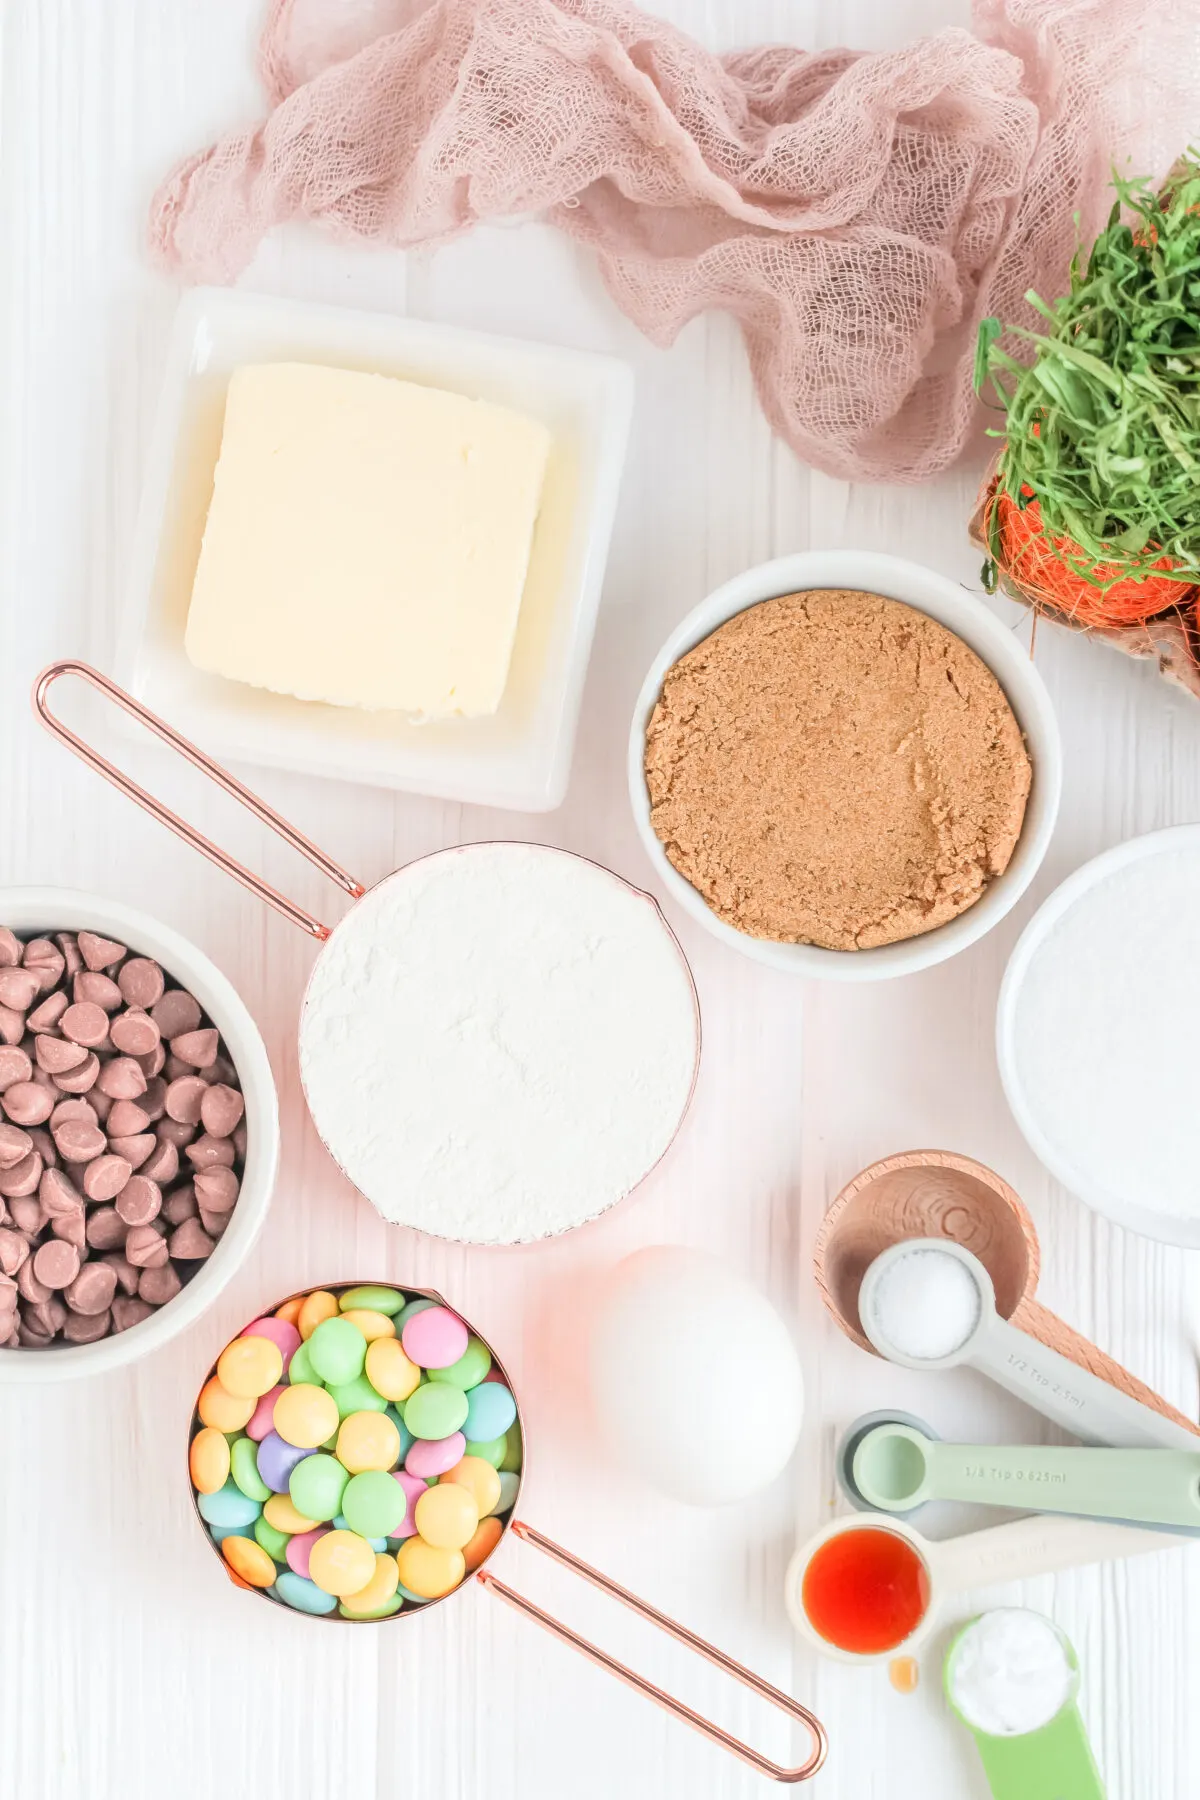 Ingredients for Easter chocolate chip cookies.